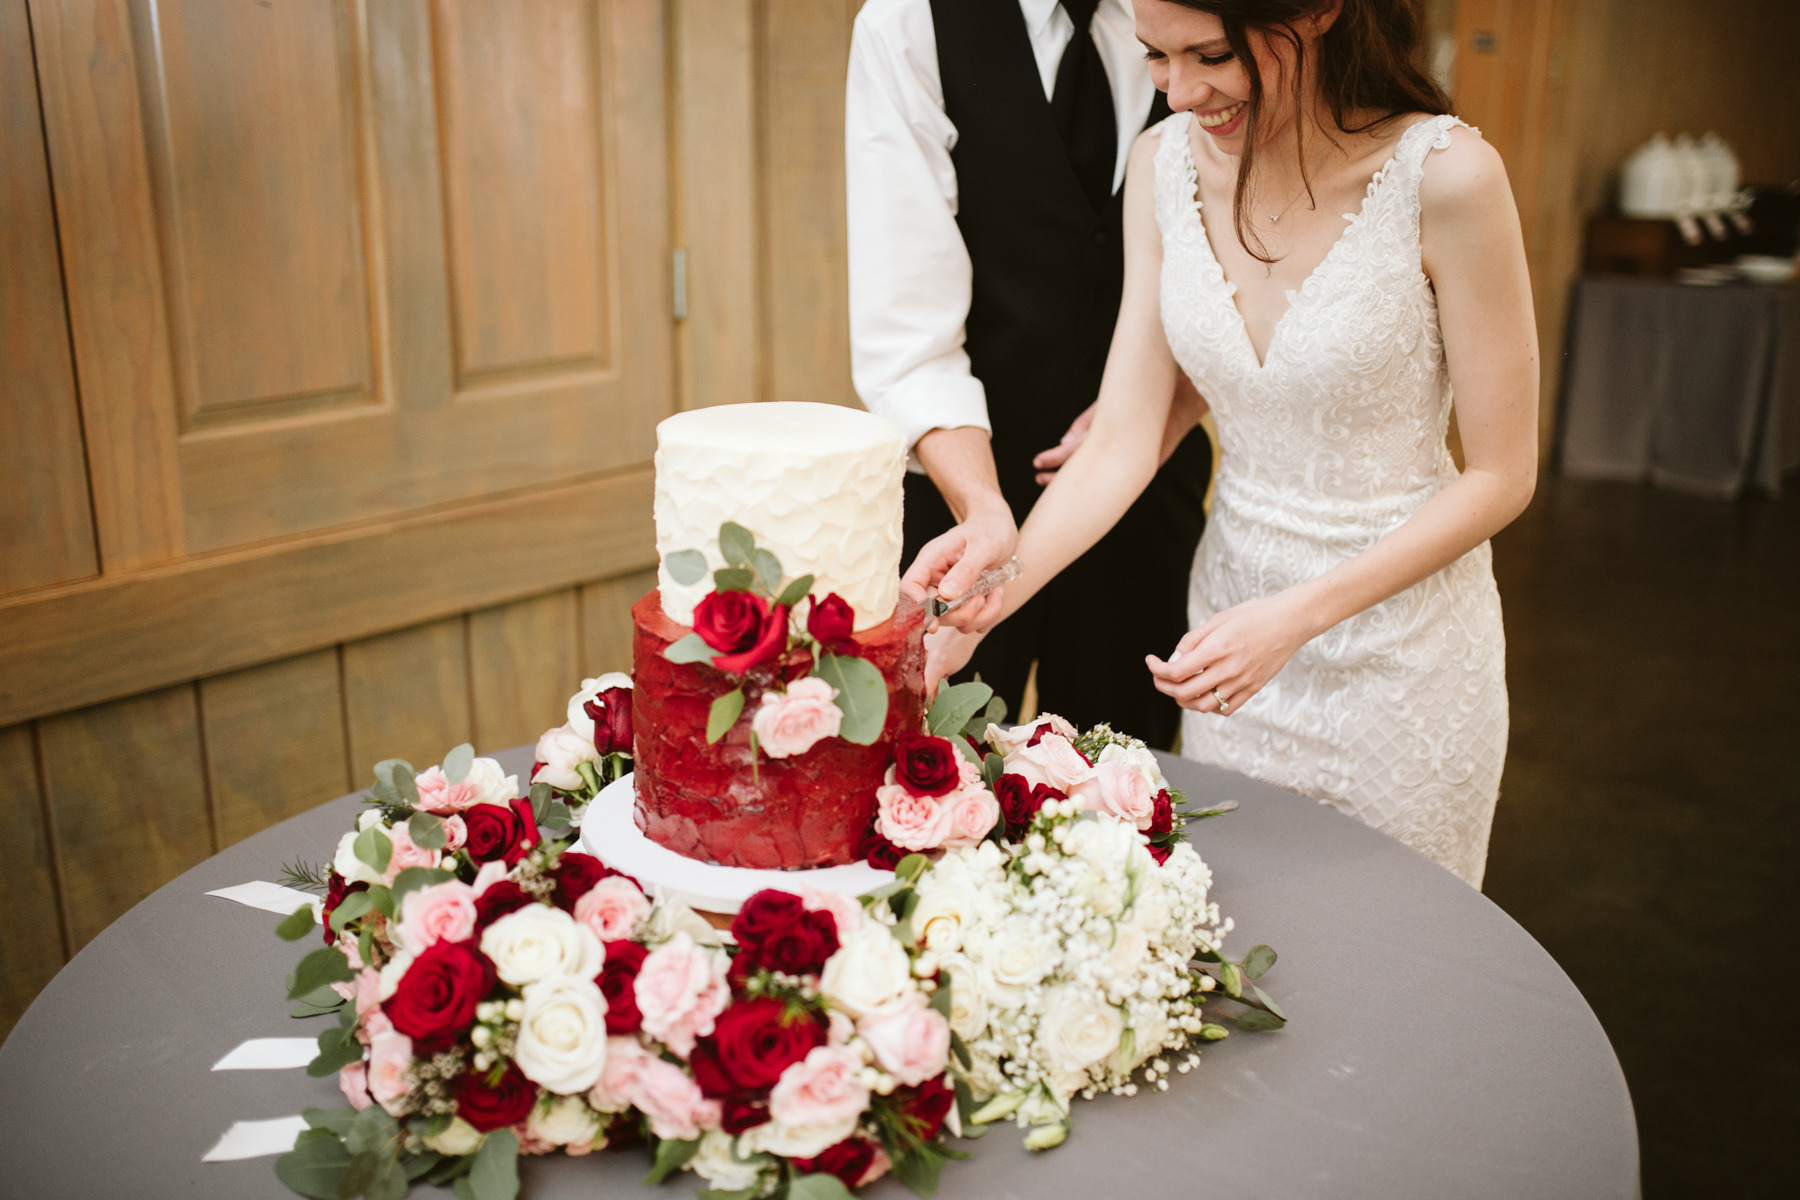 cake cutting at a Wedding reception at the loveless cafe and barn in nashville, tennessee